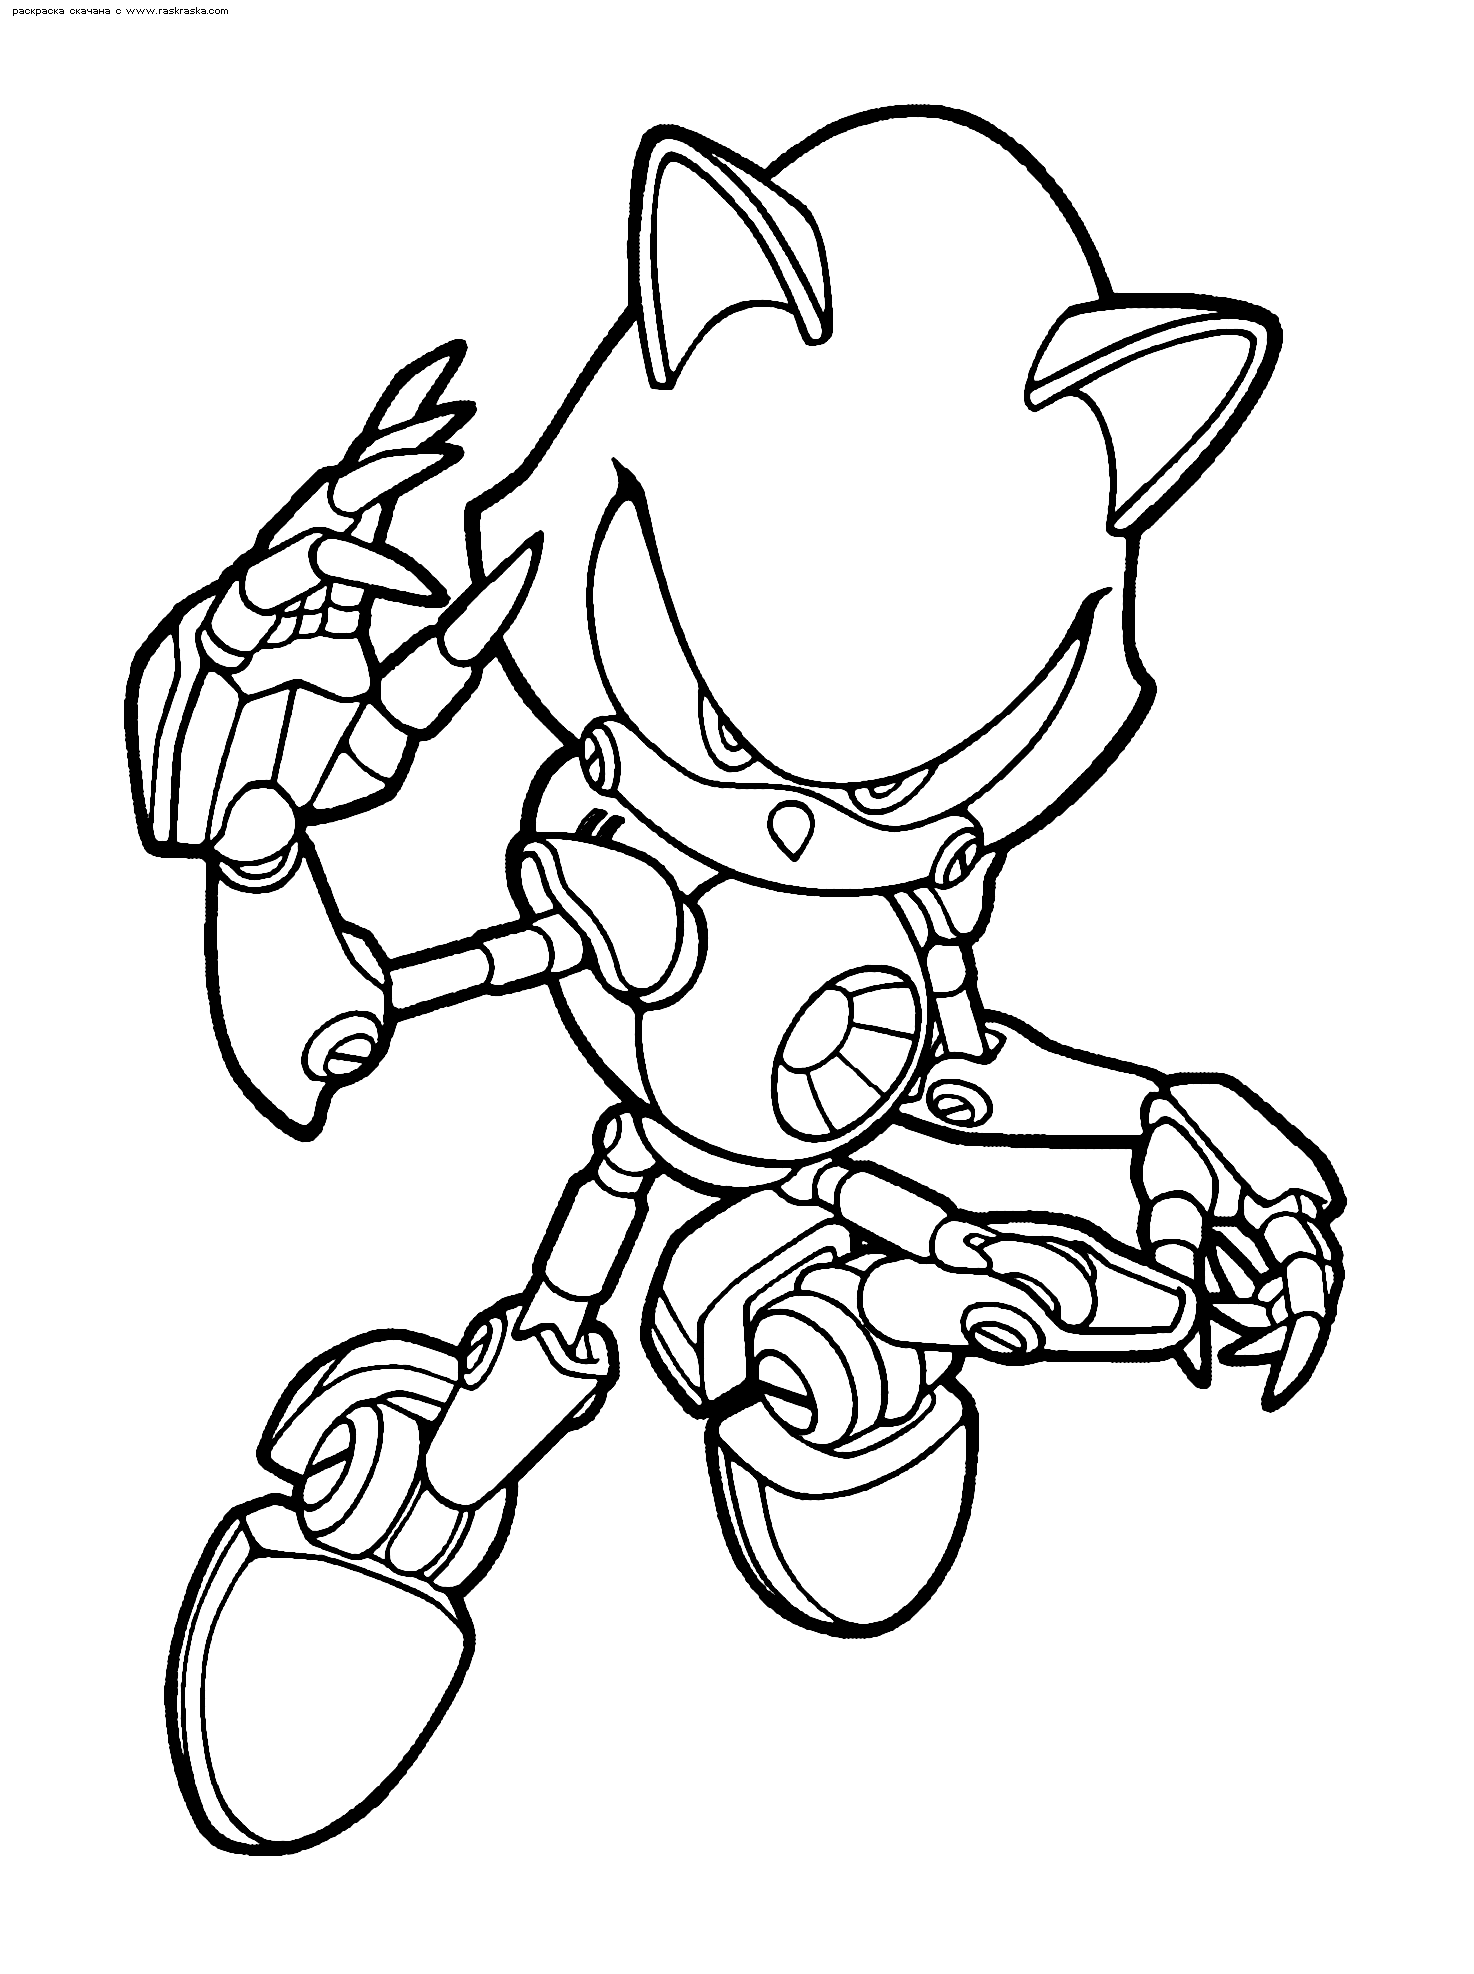 sonic coloring pages printable free printable sonic the hedgehog coloring pages for kids printable pages sonic coloring 